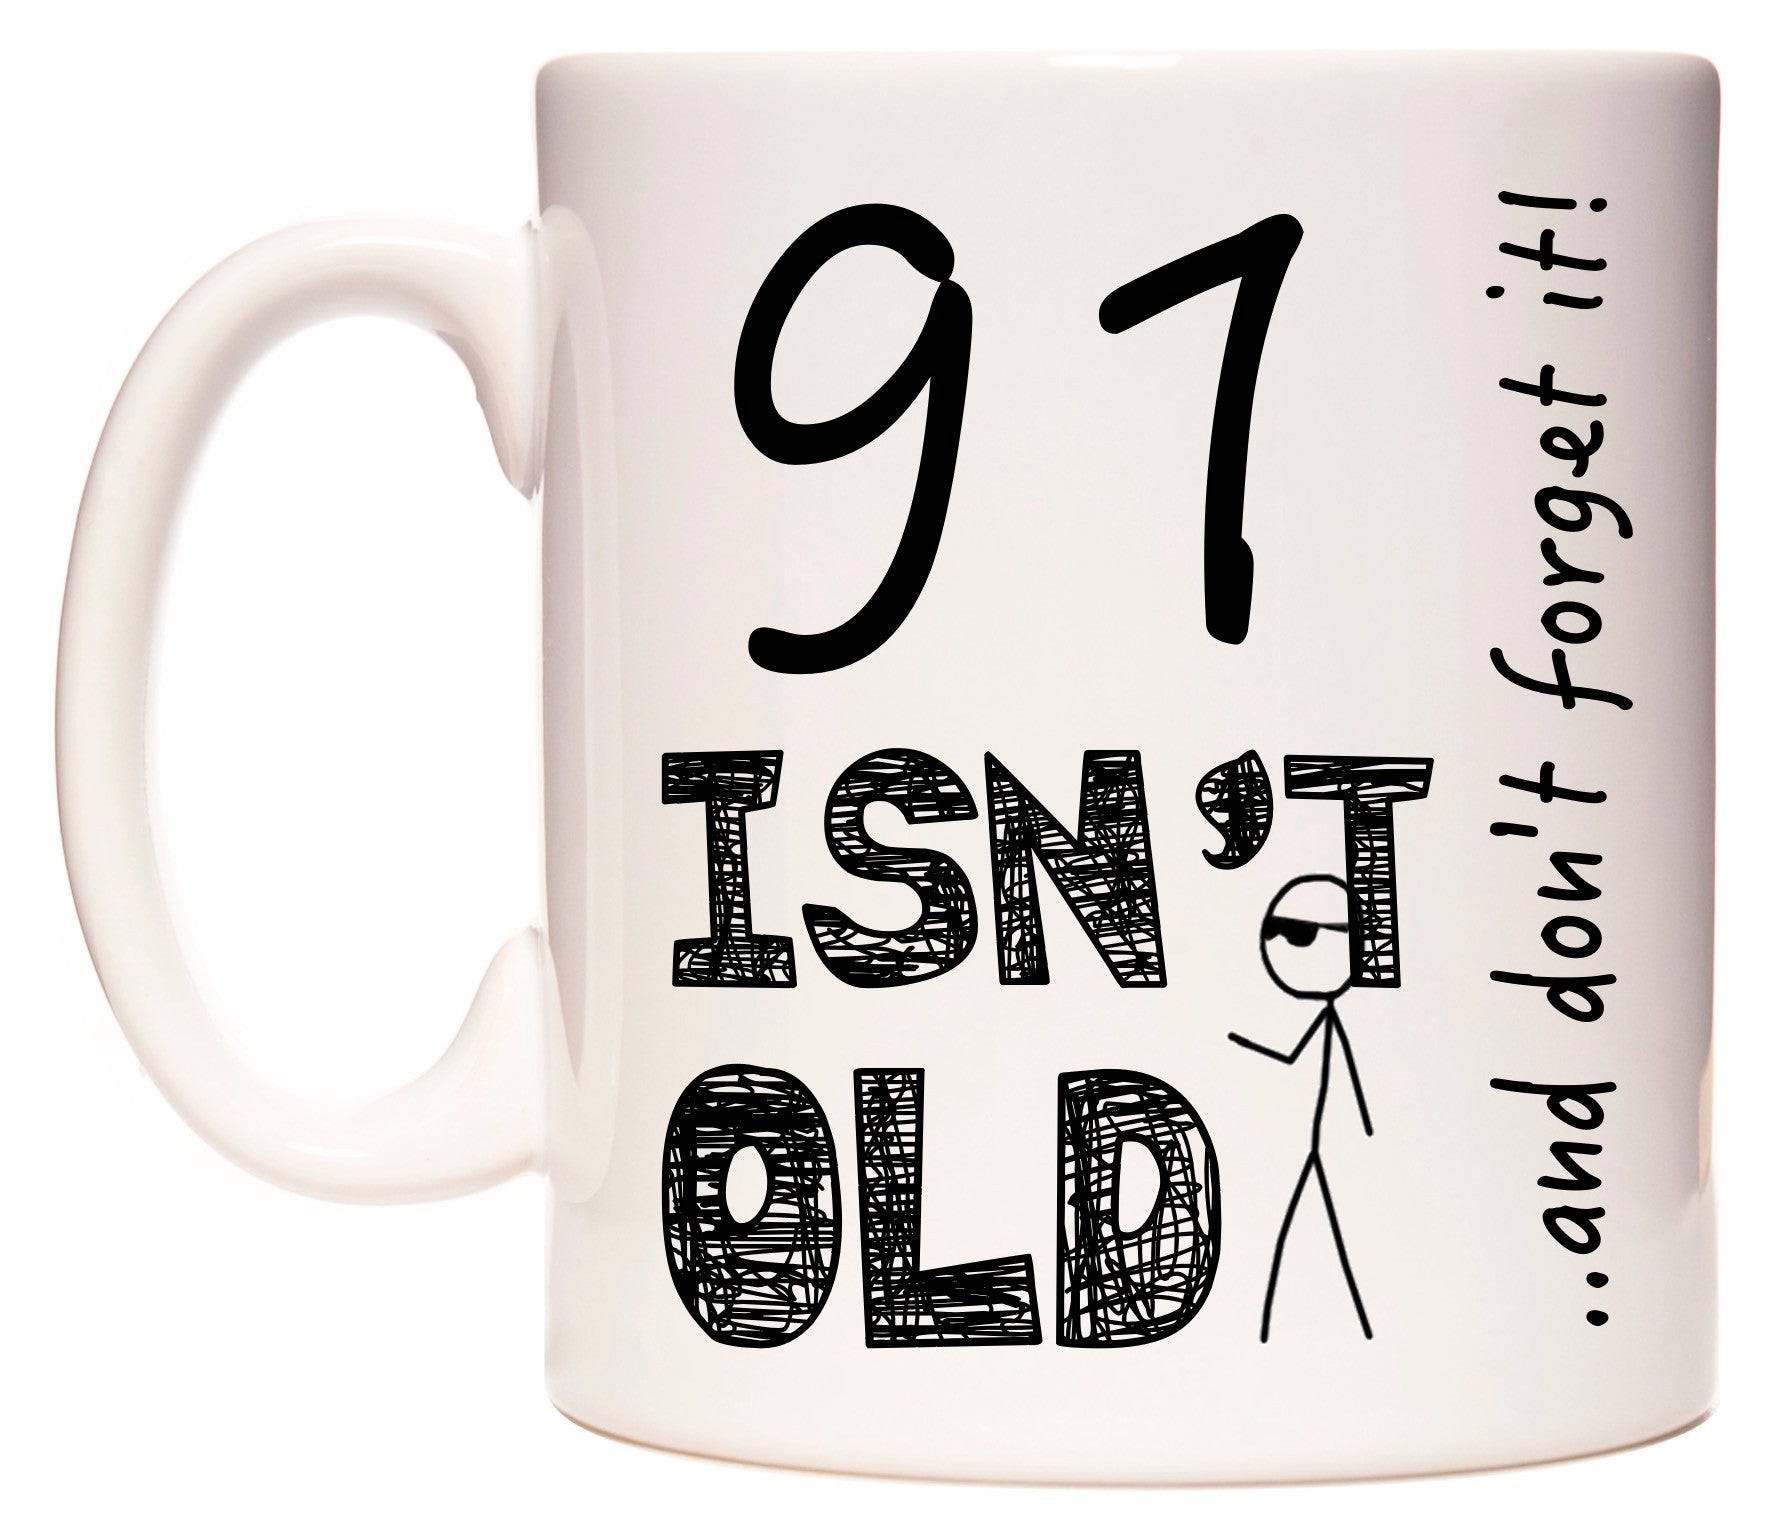 This mug features 91 Isn't Old